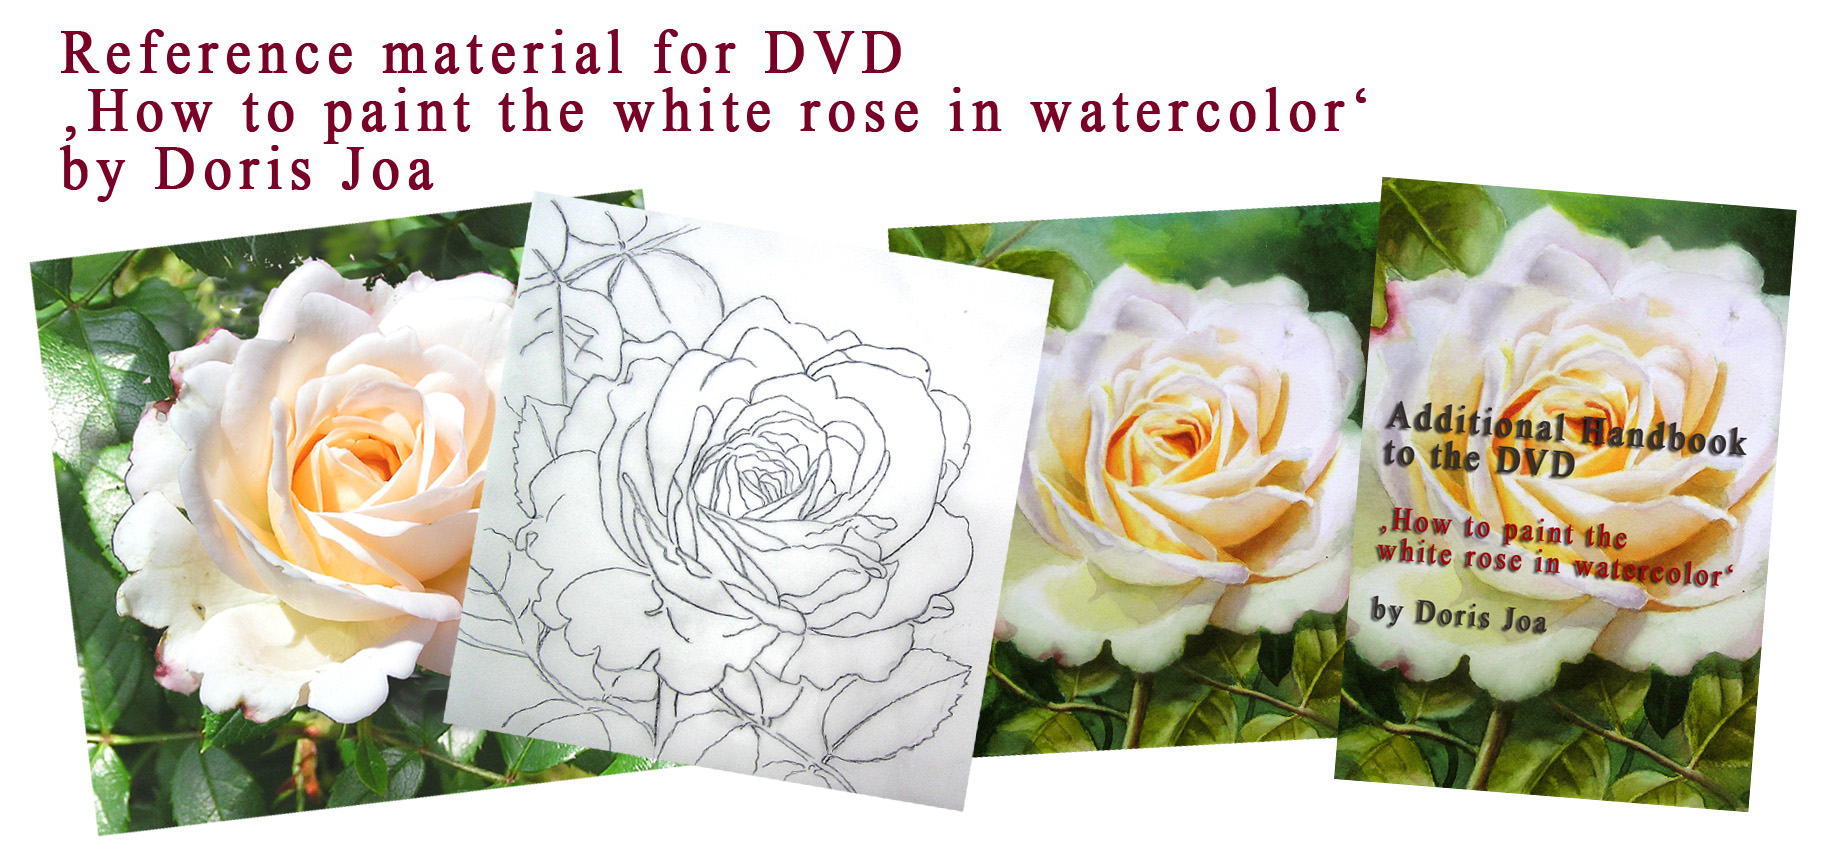 Reference material for Doris Joa's Watercolor DVD 'How to paint the white rose in watercolor'